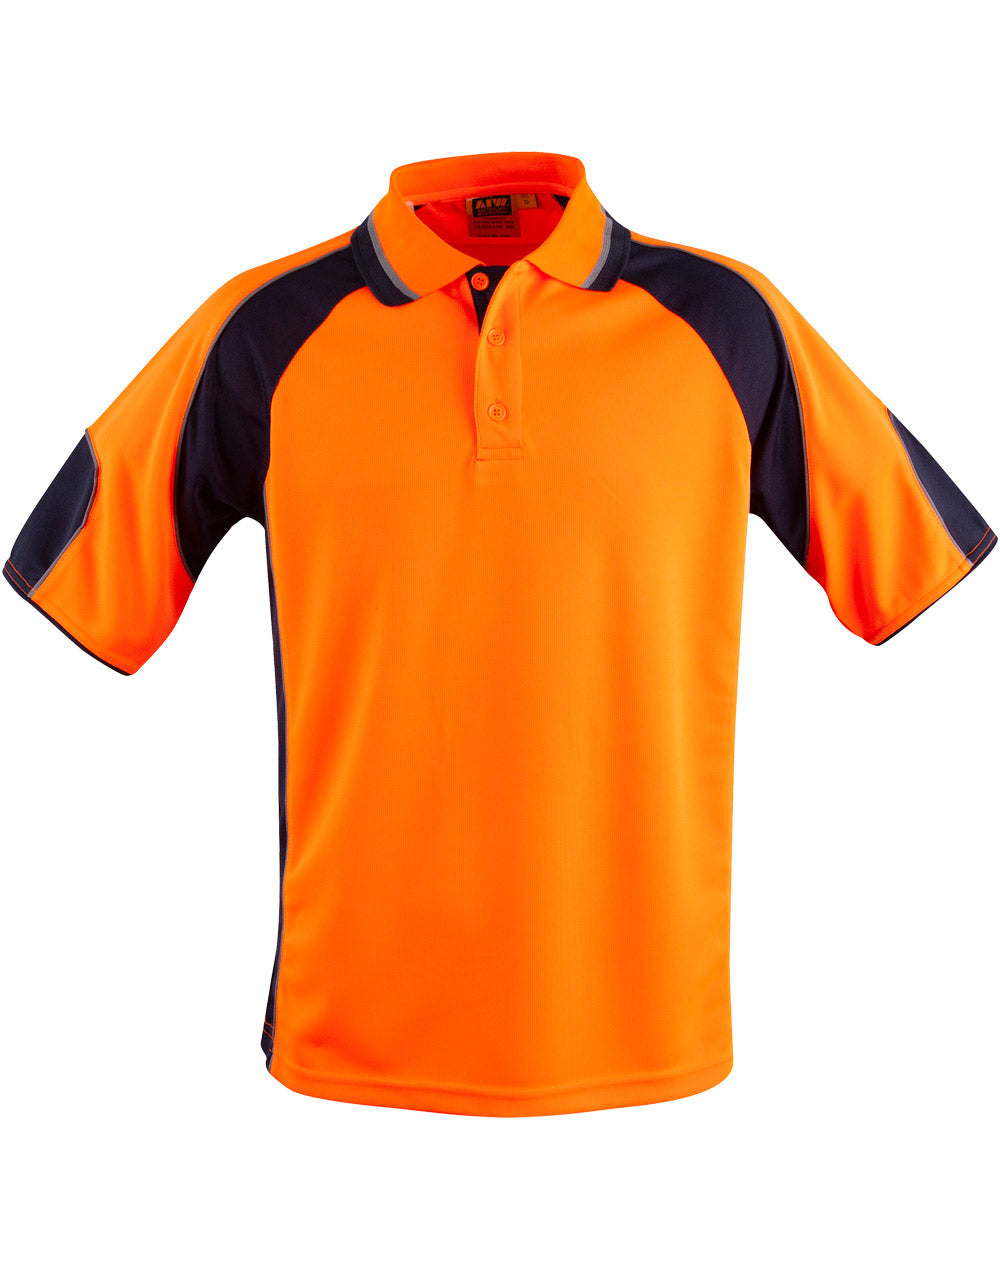 Cooldry Hivis Short Sleeve Polo Shirt - made by AIW